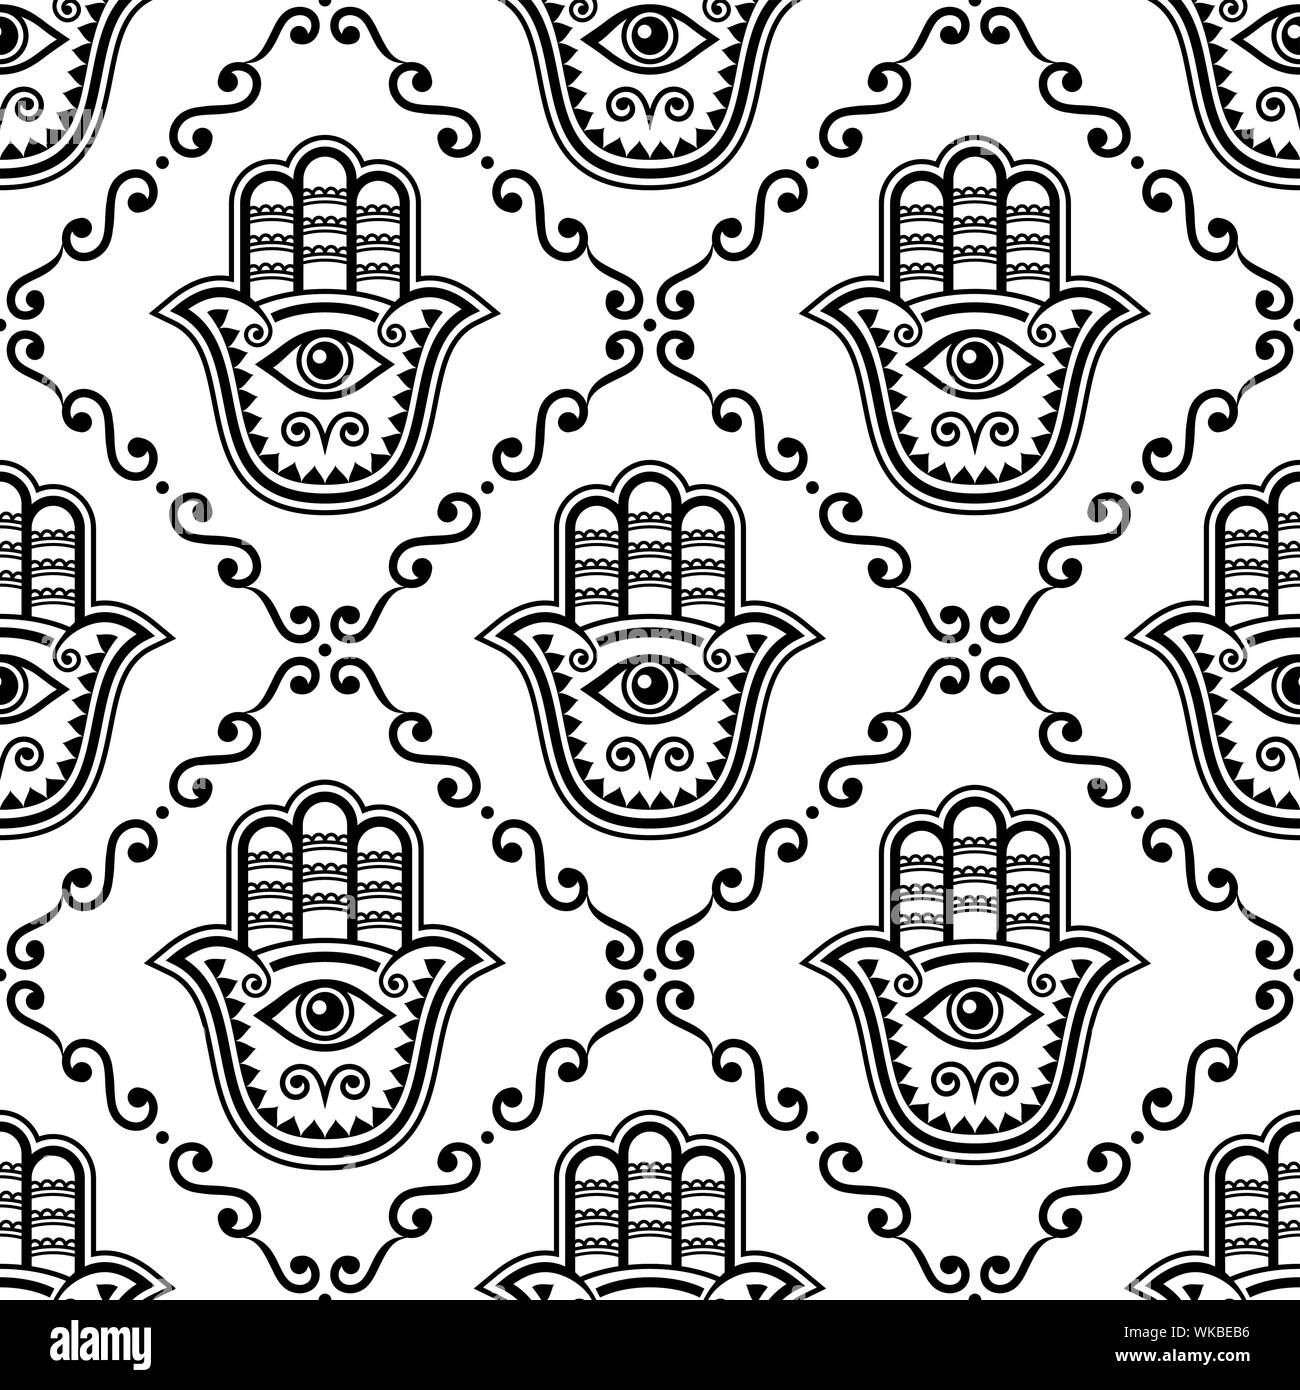 Hamsa hand seamless vector pattern, Khamsa or Hand of Fatima repetitive design, symbol of protection from devil eye background in black and white. Stock Vector